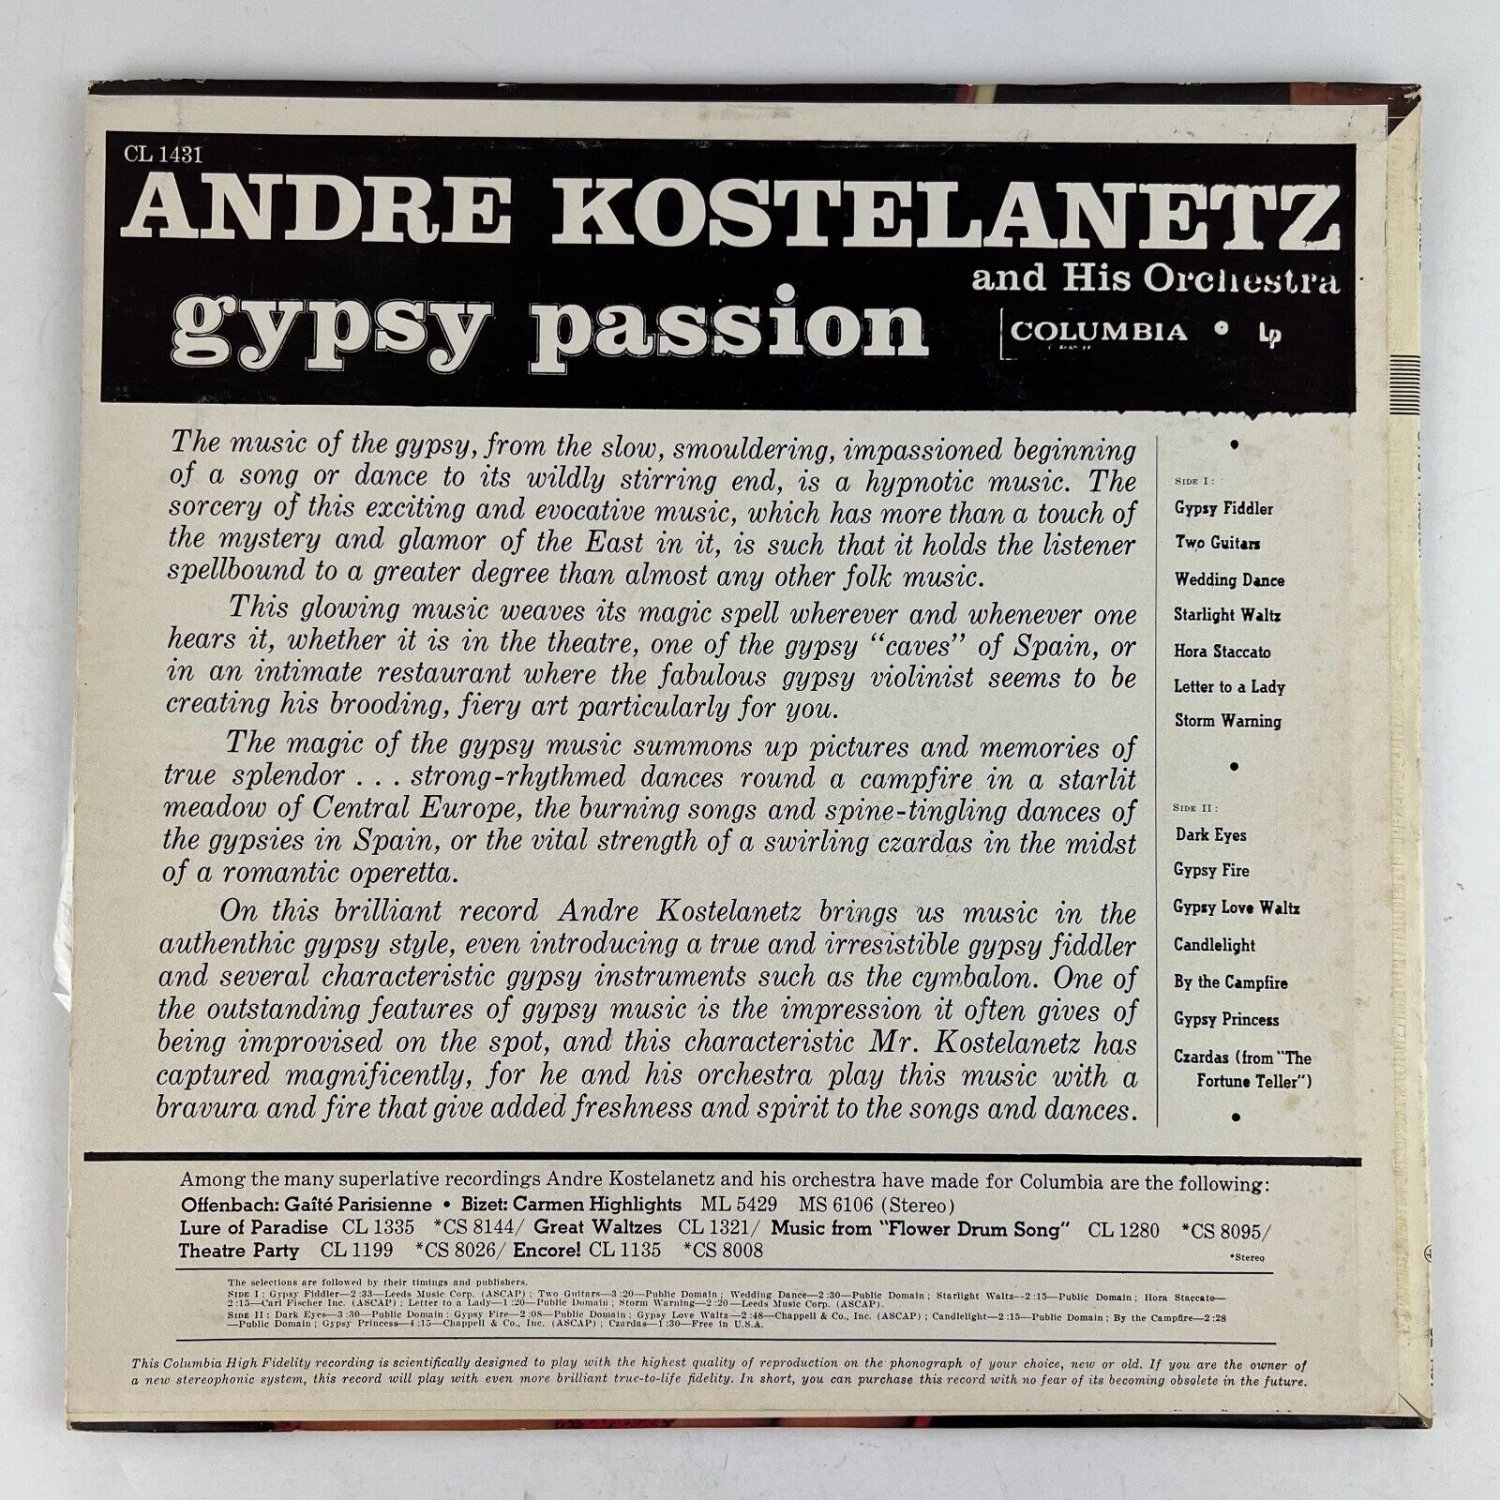 Andre Kostelanetz And His Orchestra Gypsy Passion Vinyl Lp Record Album Cl 1431